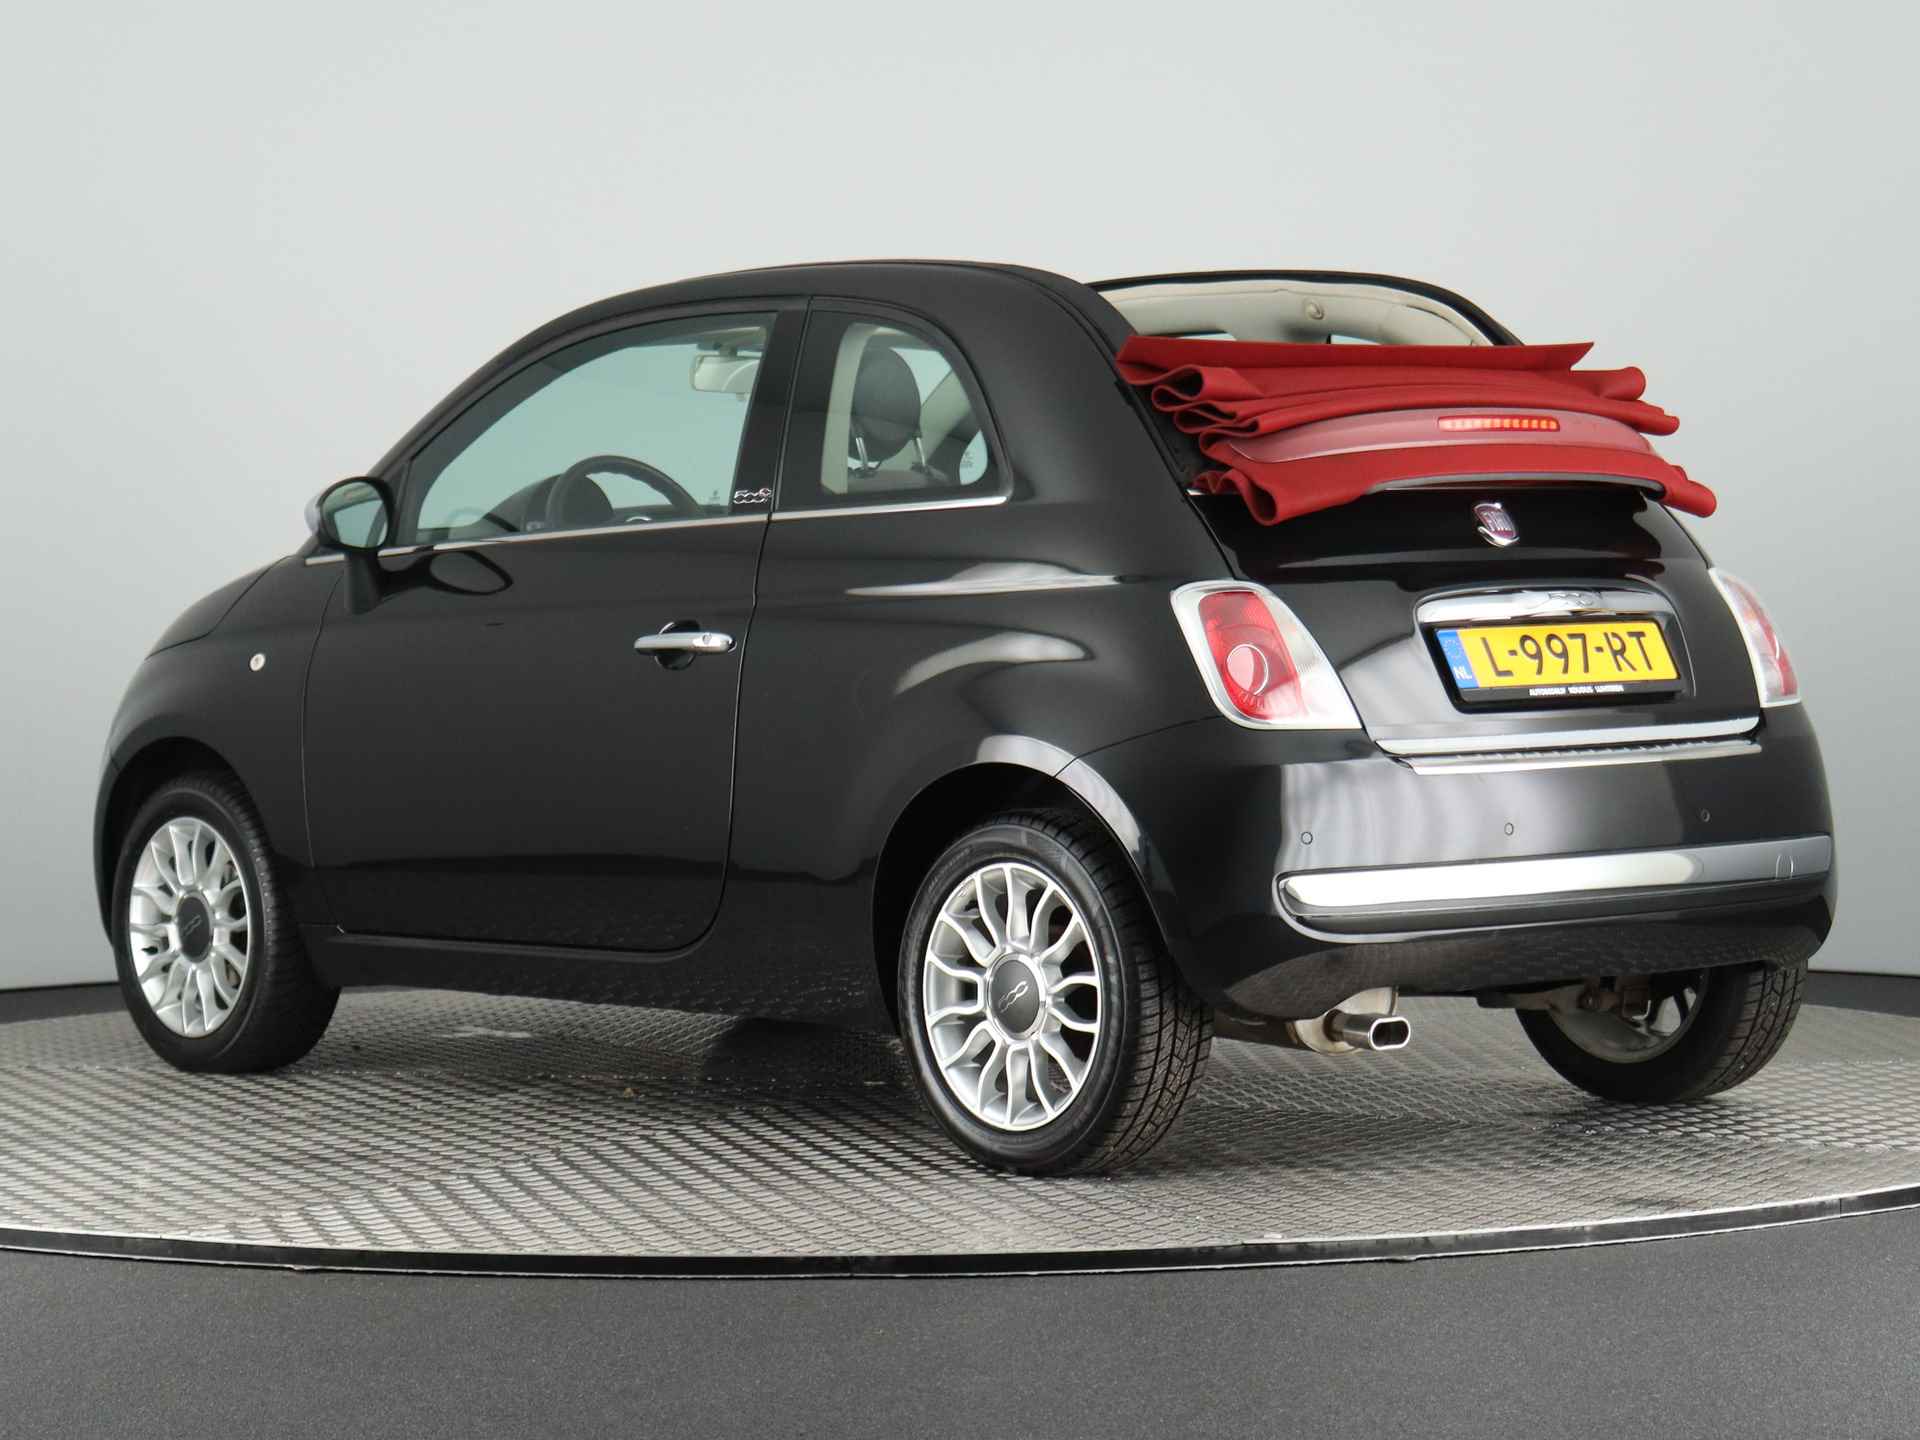 Fiat 500C 1.2 Lounge (Airco / Bluetooth / City-stand / LM velgen / PDC) - 4/49